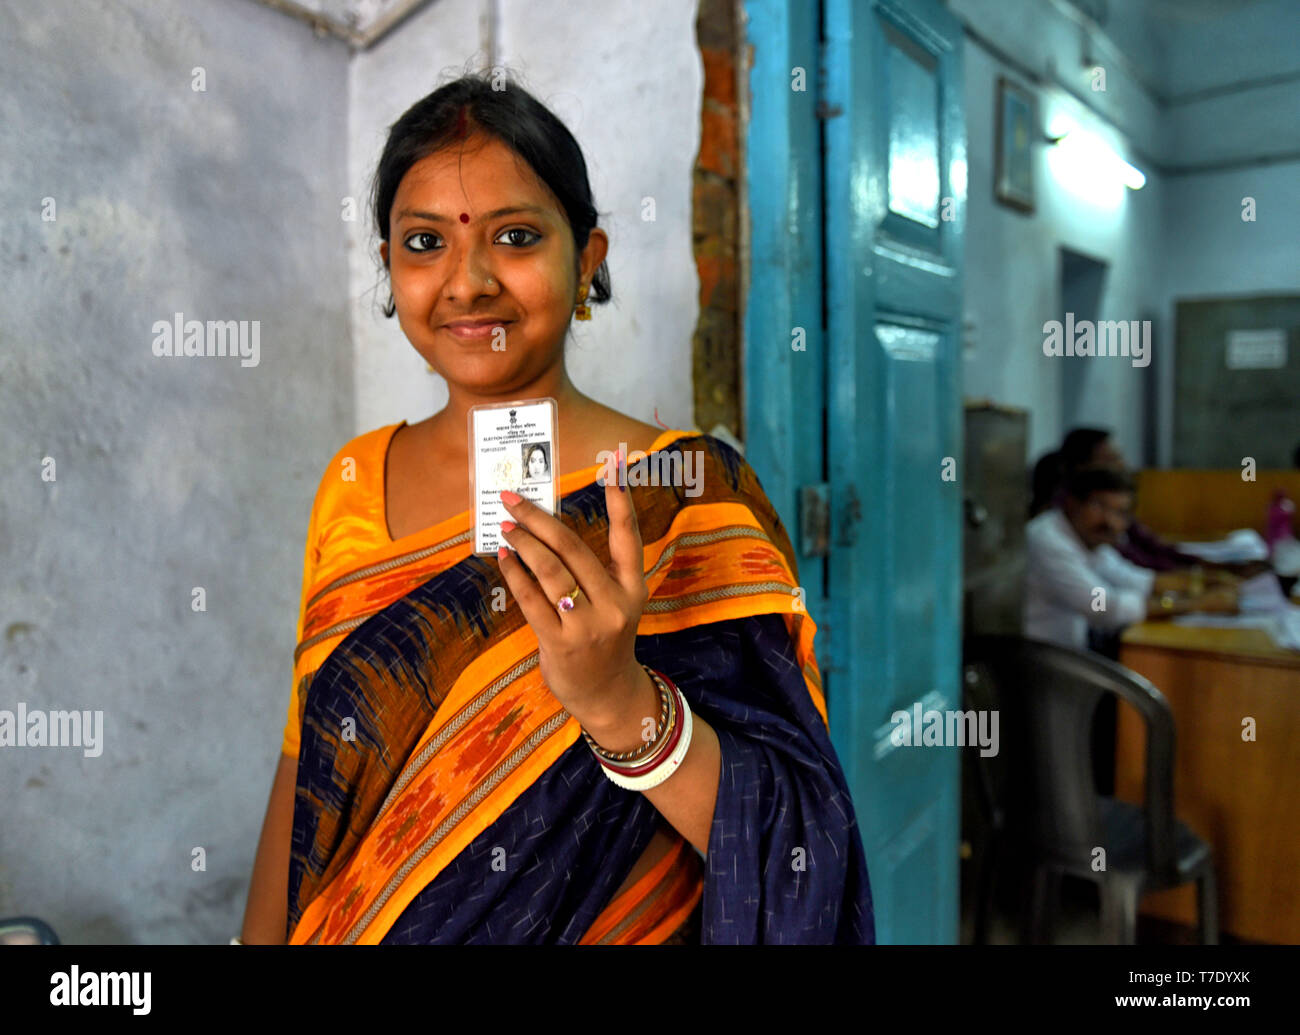 A Young woman seen showing her ink marked finger after casting the vote at a polling station during the 5th Phase of General Elections of India. Stock Photo